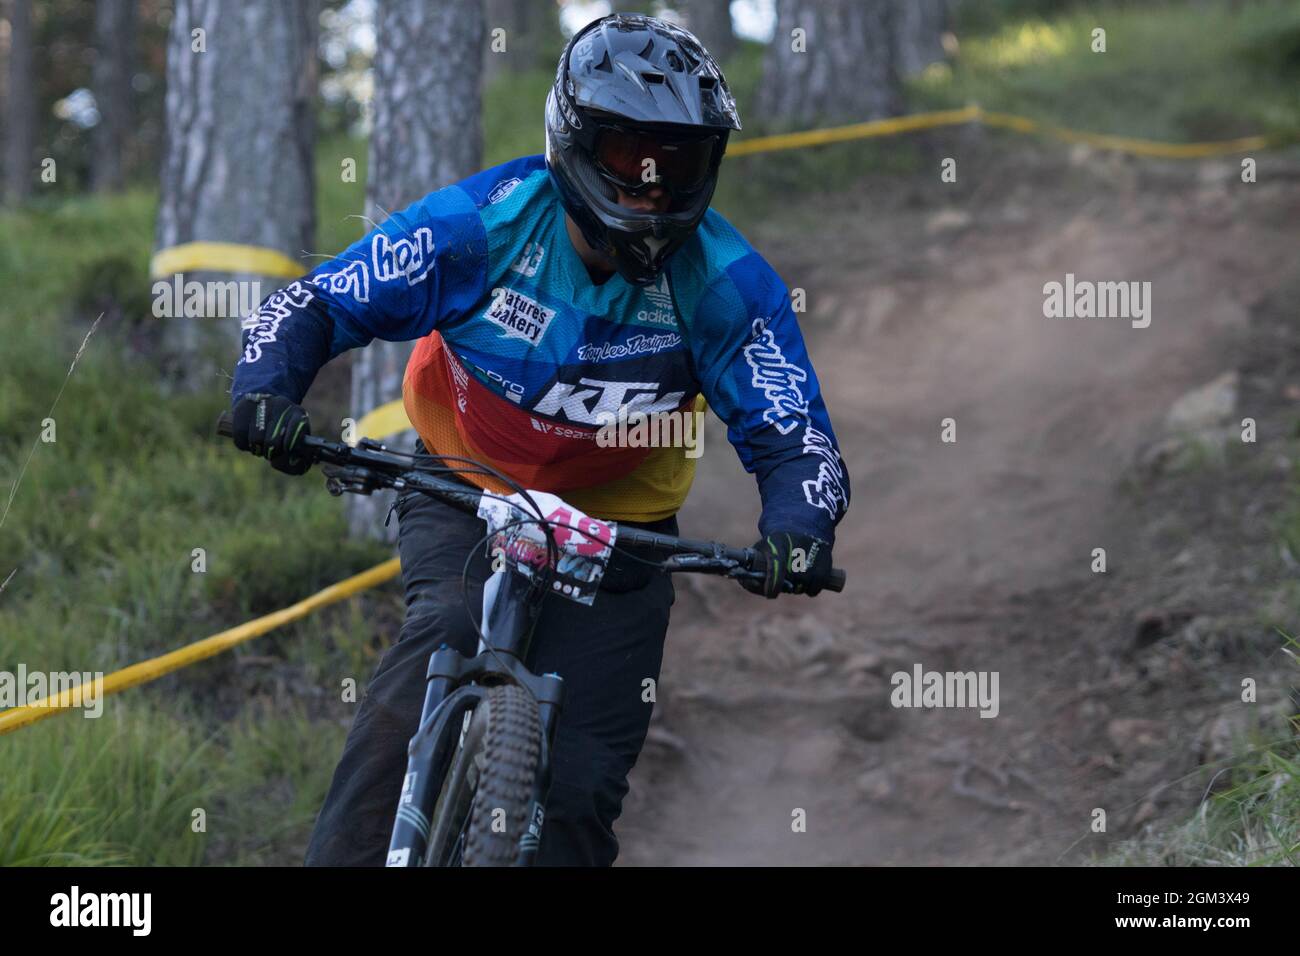 Downhill mountain biker descending during a race with dust coming from behind Stock Photo